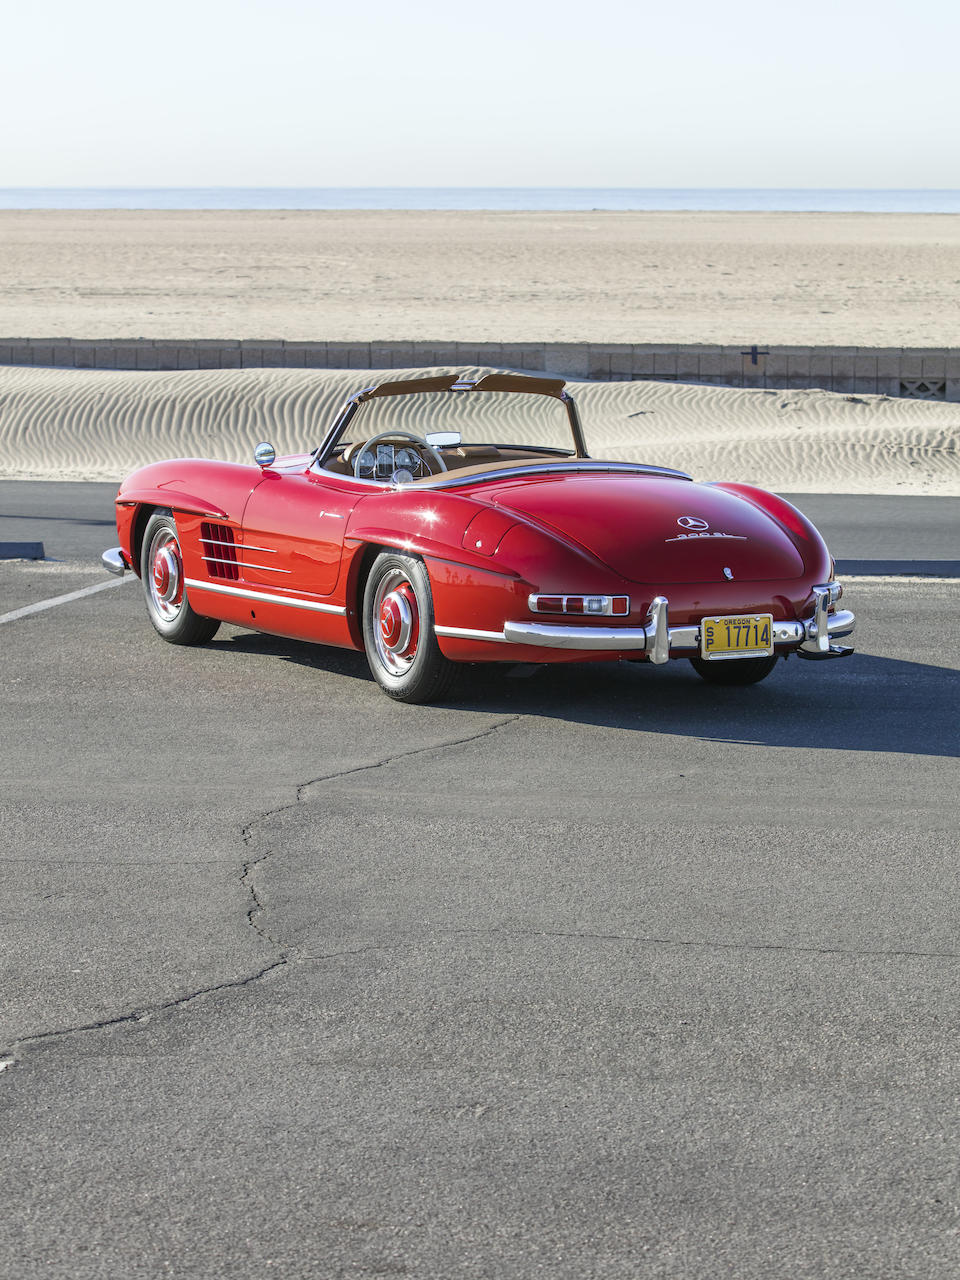 <b>1958 Mercedes-Benz 300 SL Roadster</b><br />Chassis no. 198.042.8500284<br />Engine no. 198.980.8500283<br />Body no. A198.042.8500282